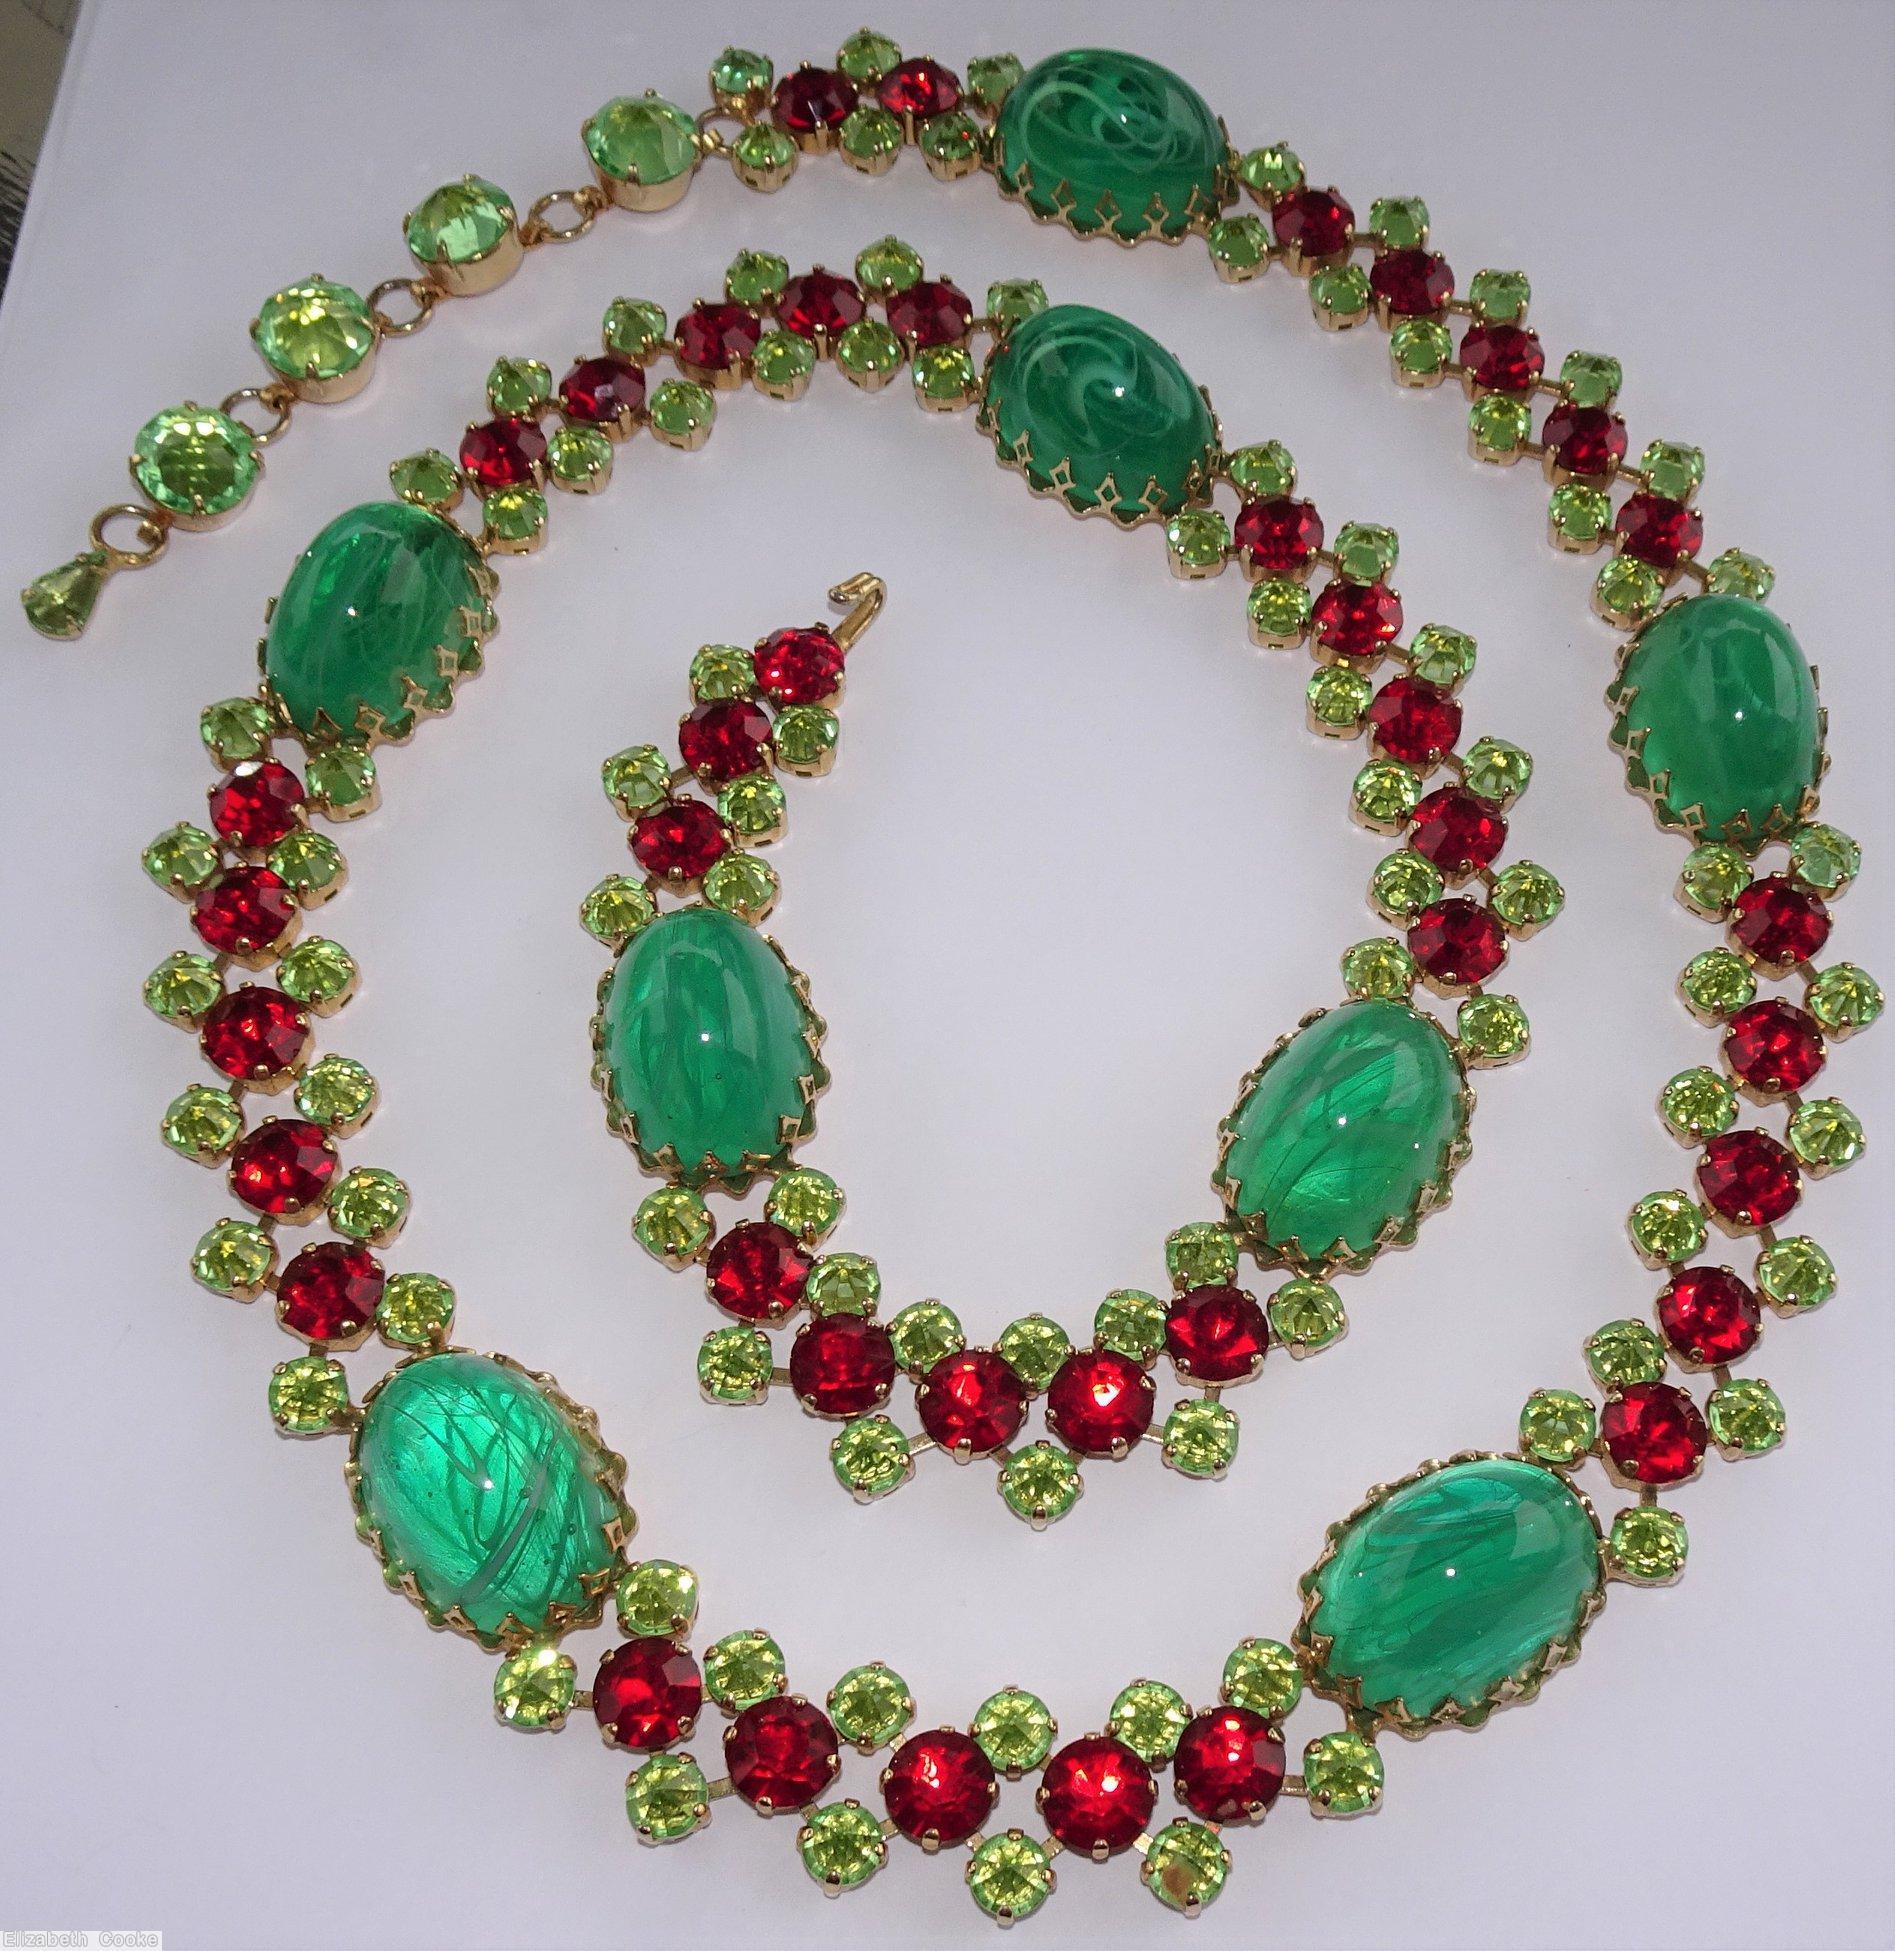 Schreiner 8 large oval cab connected by 5 large chaton 12 small chaton marbled emerald large oval cab ruby clear green jewelry